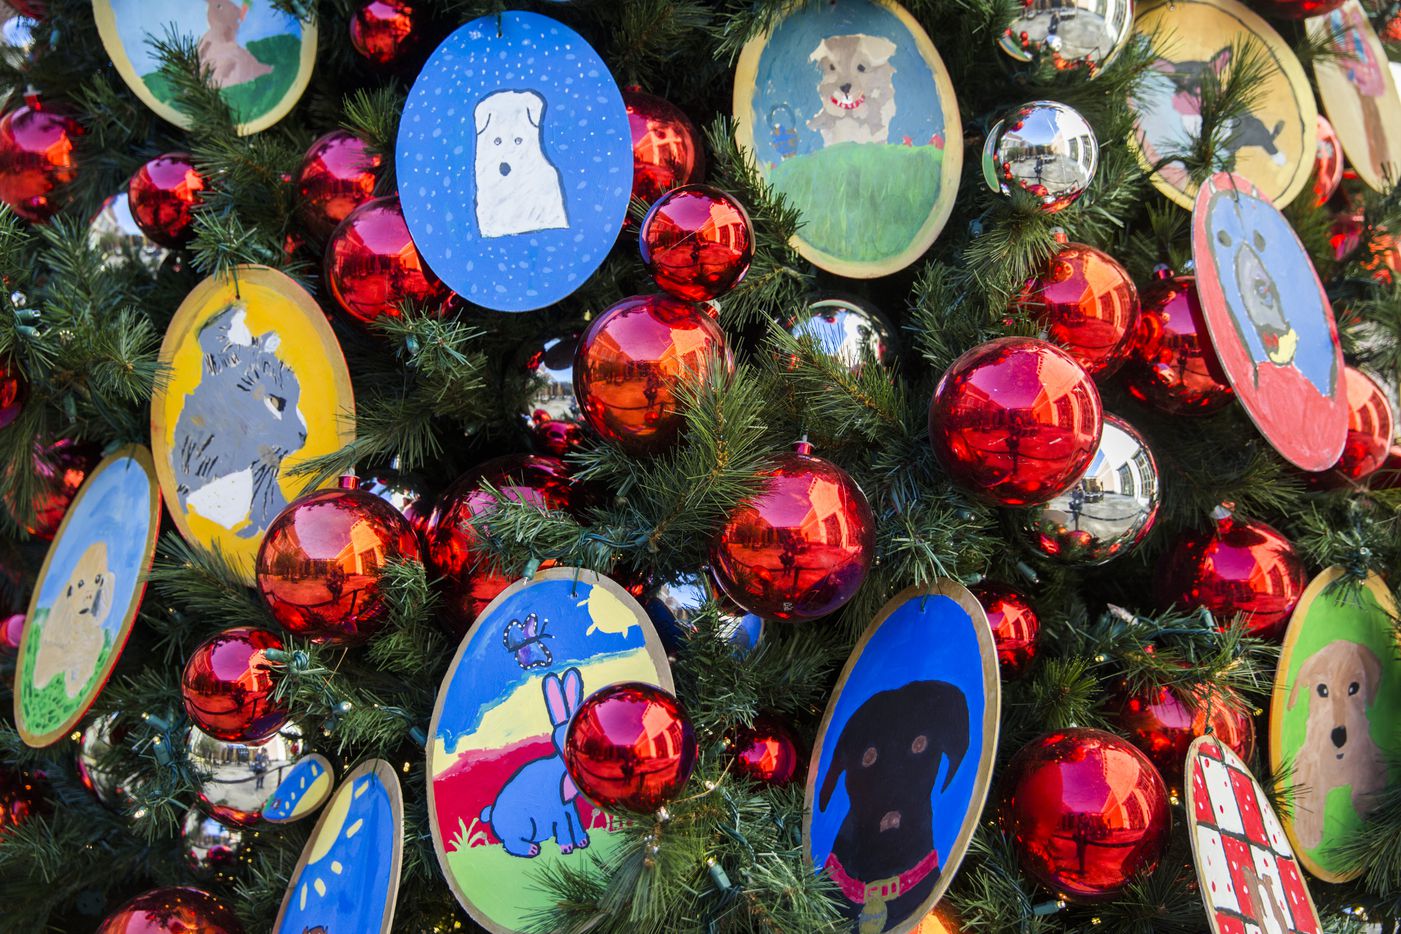 A Christmas tree decorated with ornaments made by elementary school children is displayed in...